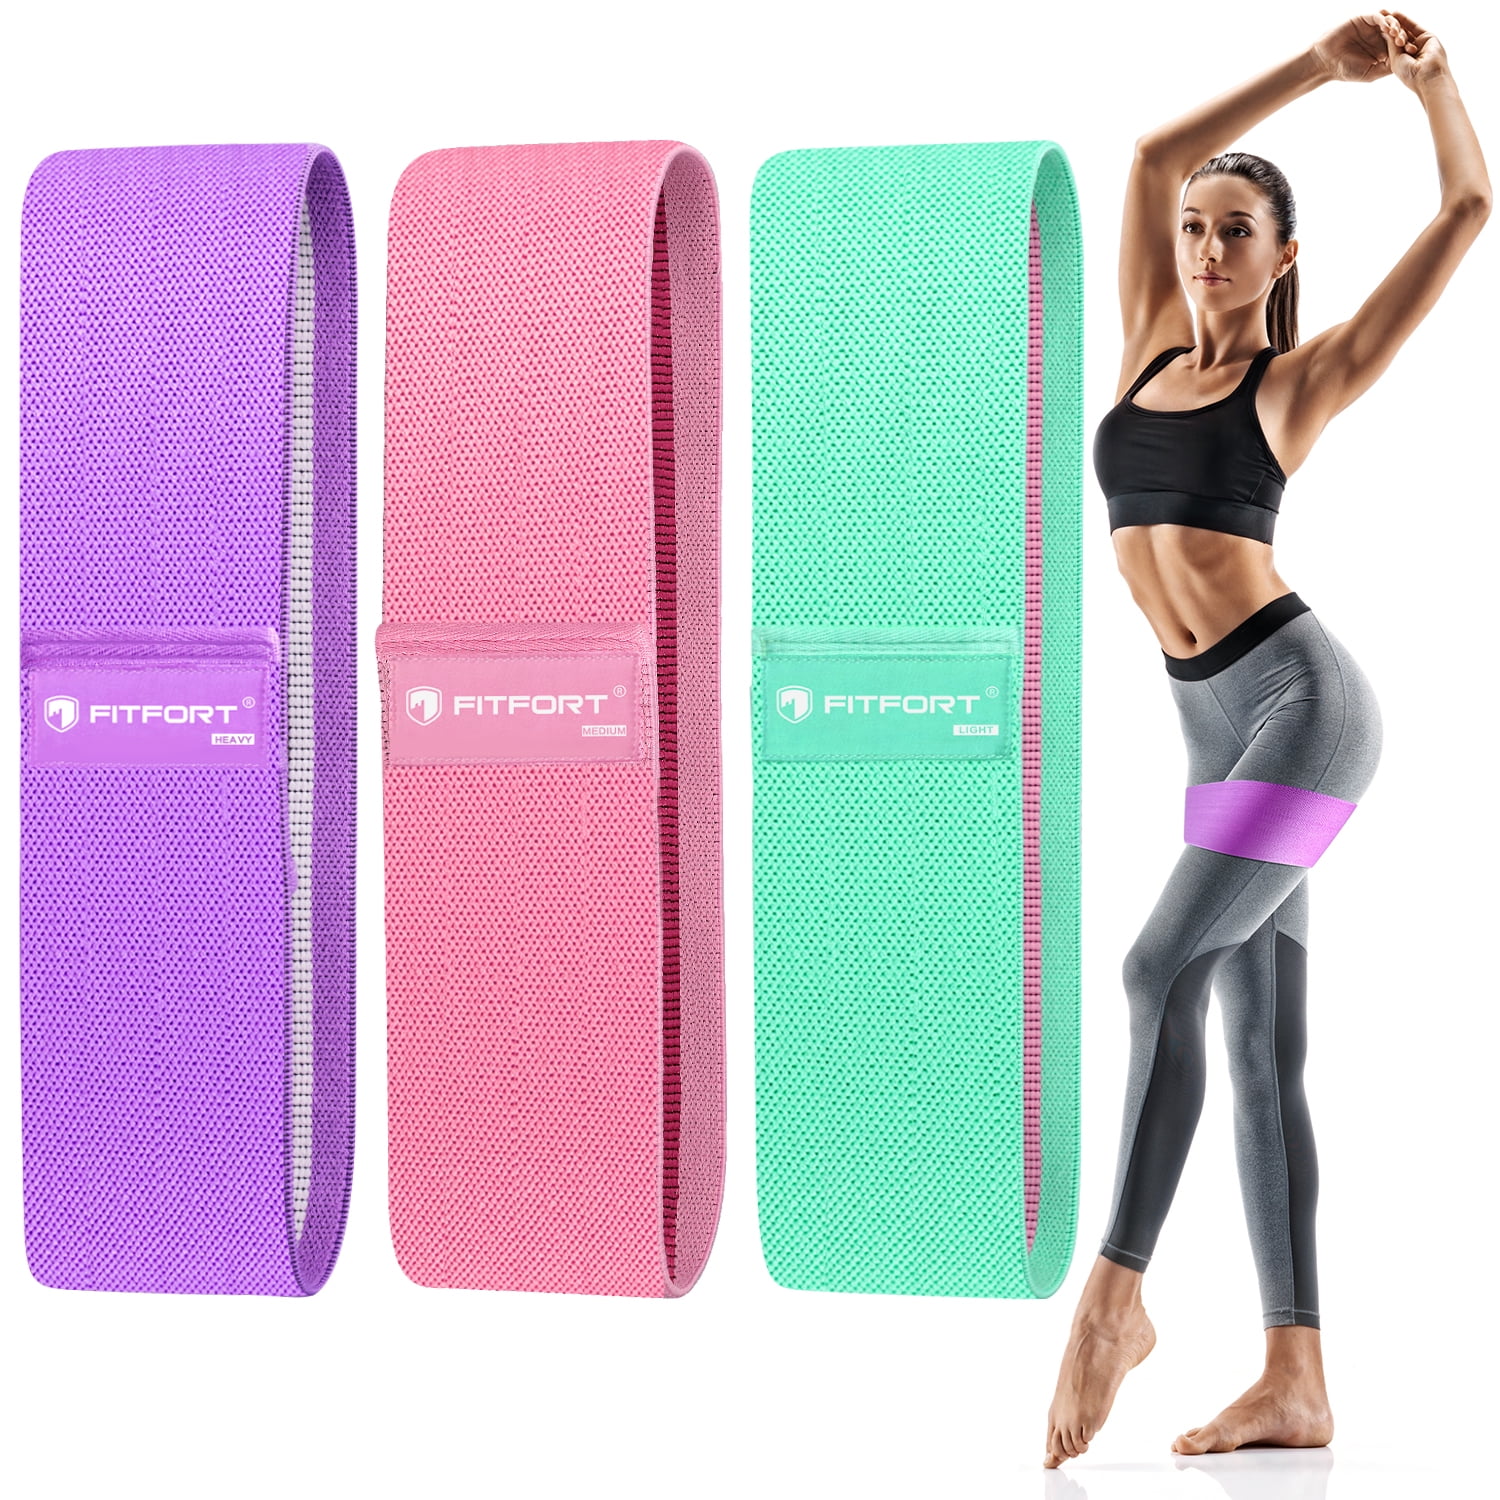 Thick Resistance Bands for Women Hip Resistance Bands for Fitness Booty Loops Bands for Gym Non-Slip 3 Workout Bands